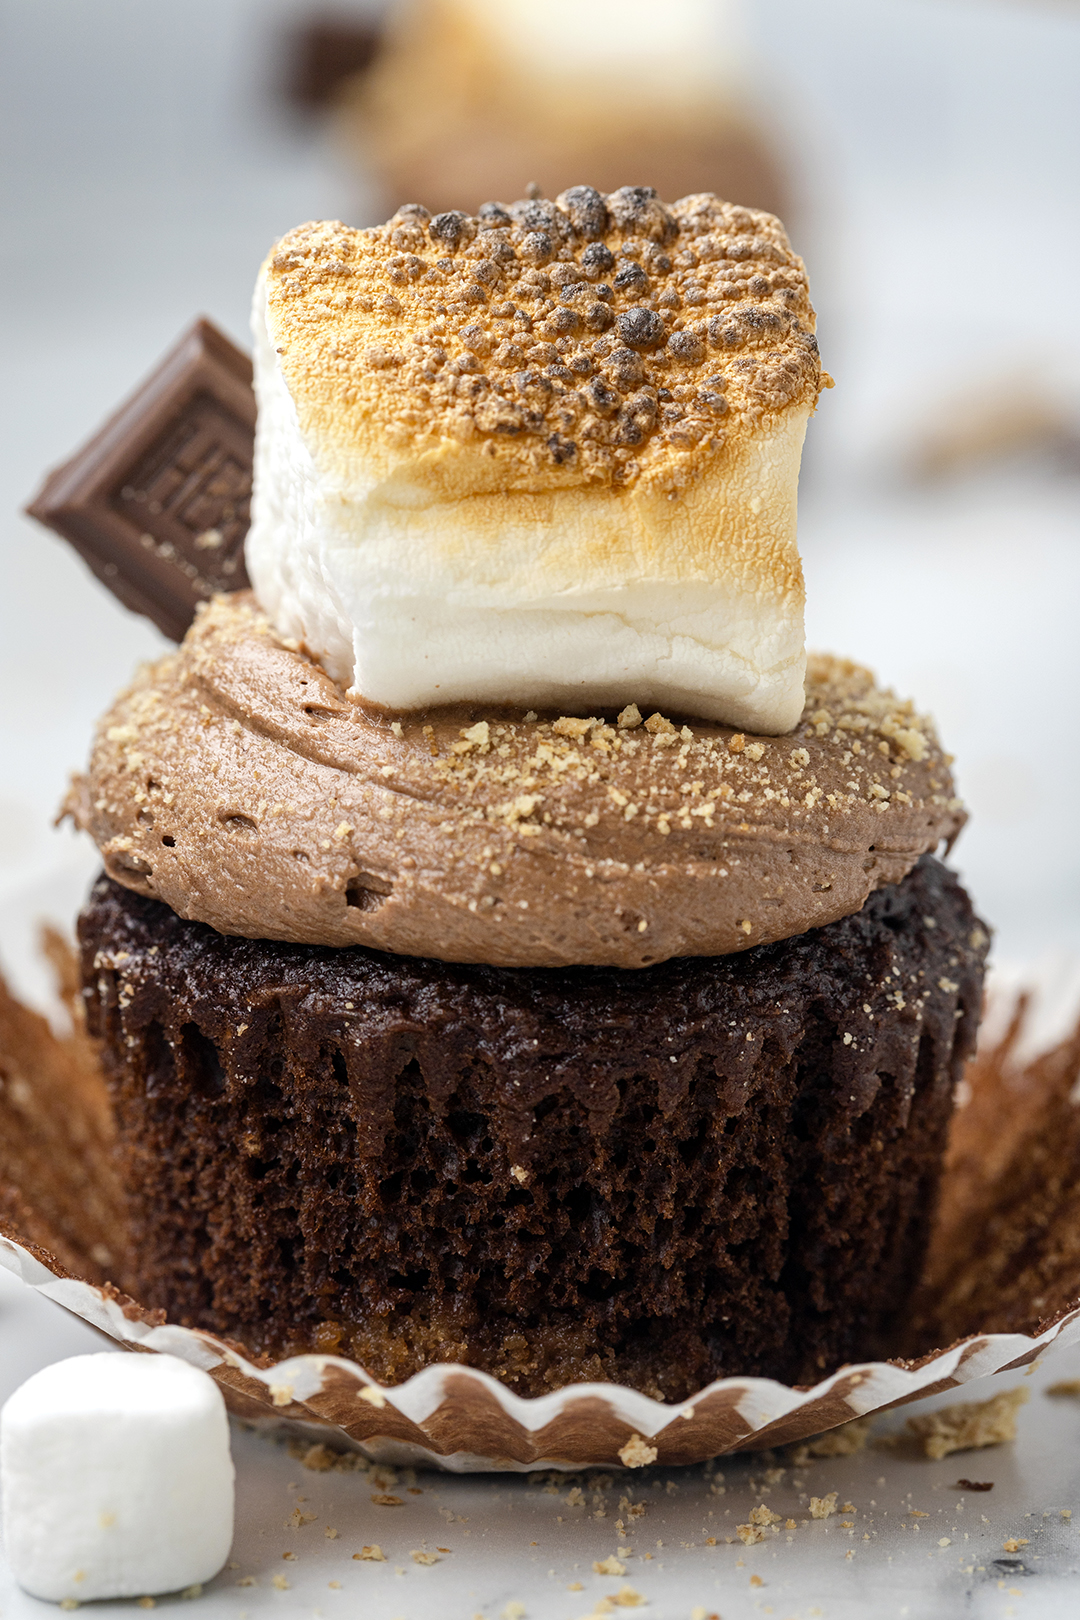 up close view of a s'mores cupcake with graham cracker and chocolate cake base then topped with chocolate frosting, toasted marshmallow, hershey bar and dusted with crushed graham cracker